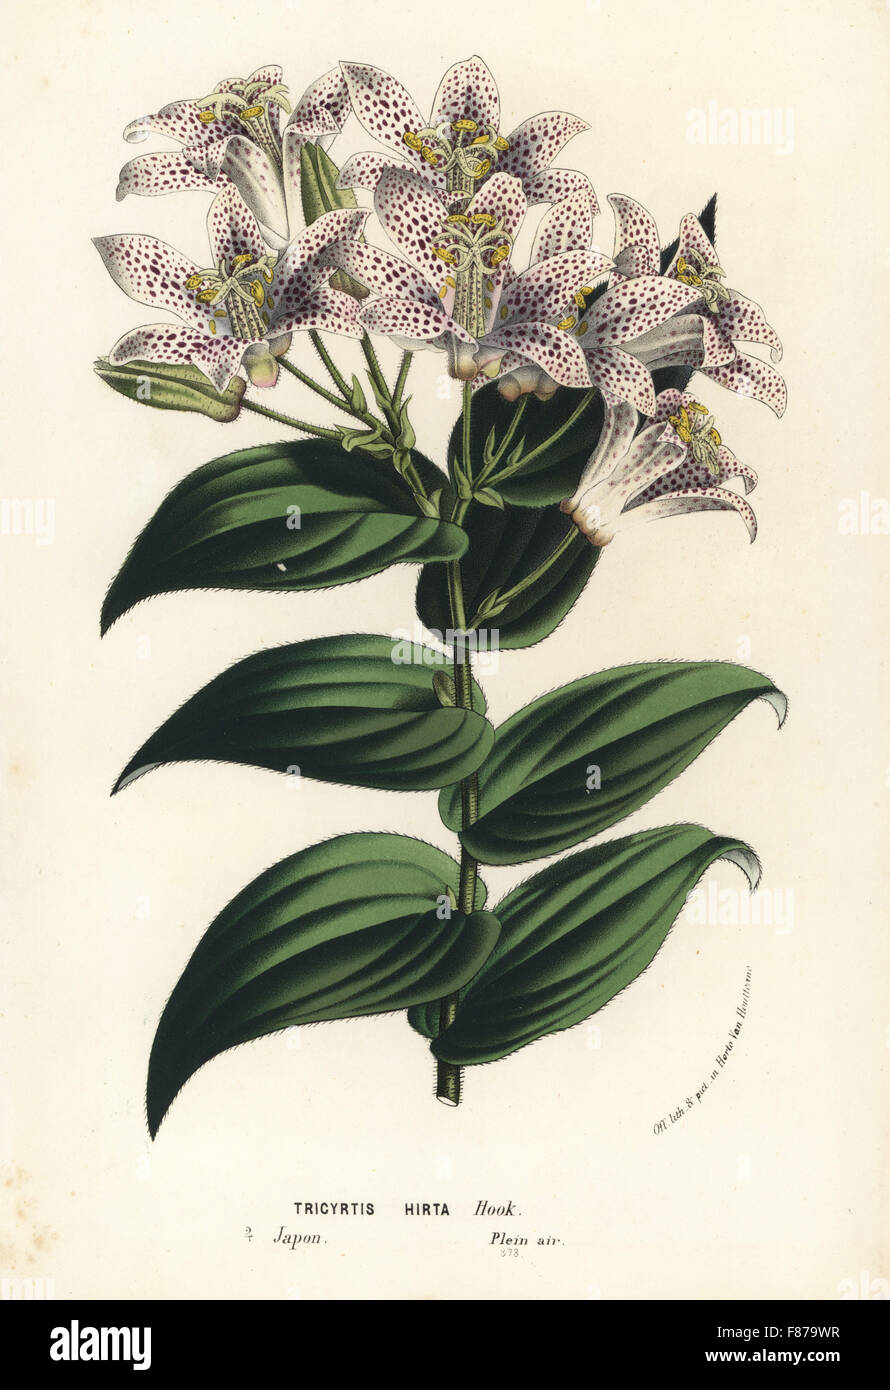 Toad lily, Tricyrtis hirta. Japan. Handcoloured lithograph from Louis van Houtte and Charles Lemaire's Flowers of the Gardens and Hothouses of Europe, Flore des Serres et des Jardins de l'Europe, Ghent, Belgium, 1862-65. Stock Photo